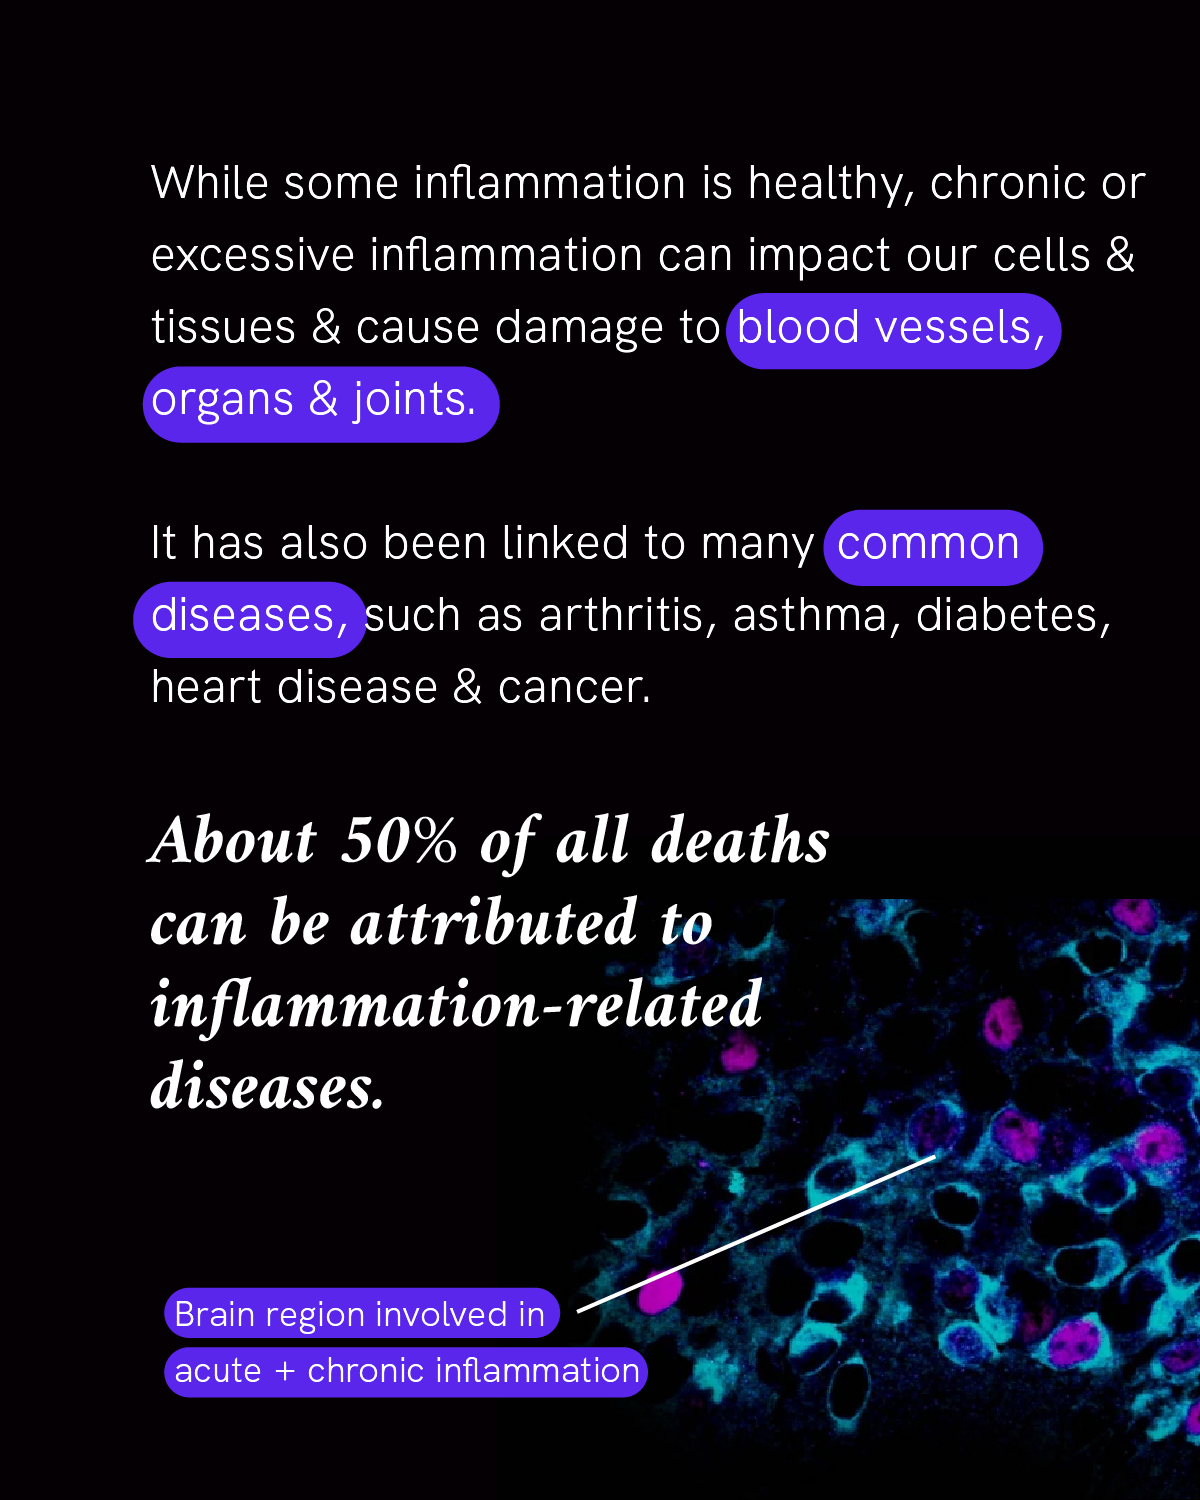 Infographic reads “While some inflammation is healthy, chronic, or excessive inflammation can impact our cells & tissues & cause damage to blood vessels, organs & joints. It has also been linked to many common diseases, such as arthritis, asthma, diabetes, heart disease & cancer. About 50% of all deaths can be attributed to inflammation-related diseases.” A photo of magnified cells in the brain region highlighted by purple and blue colors accompanies the text.